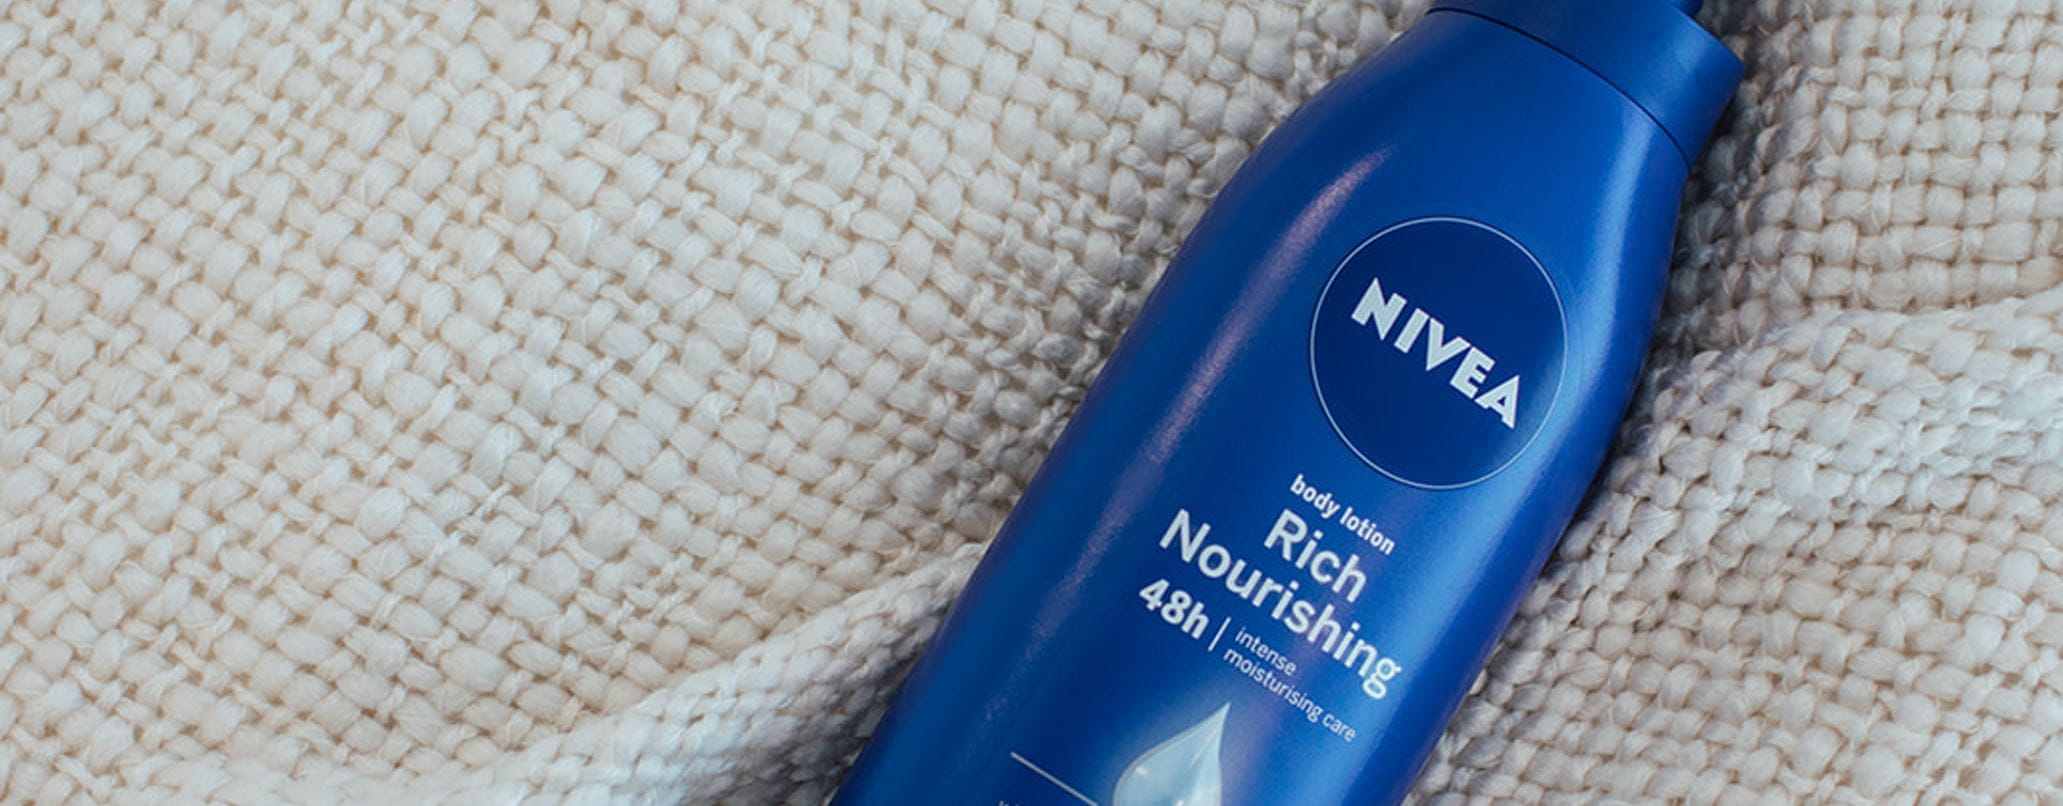 NIVEA Skin care tips a range of Body Lotions Nourishing, Hydration, Smooth